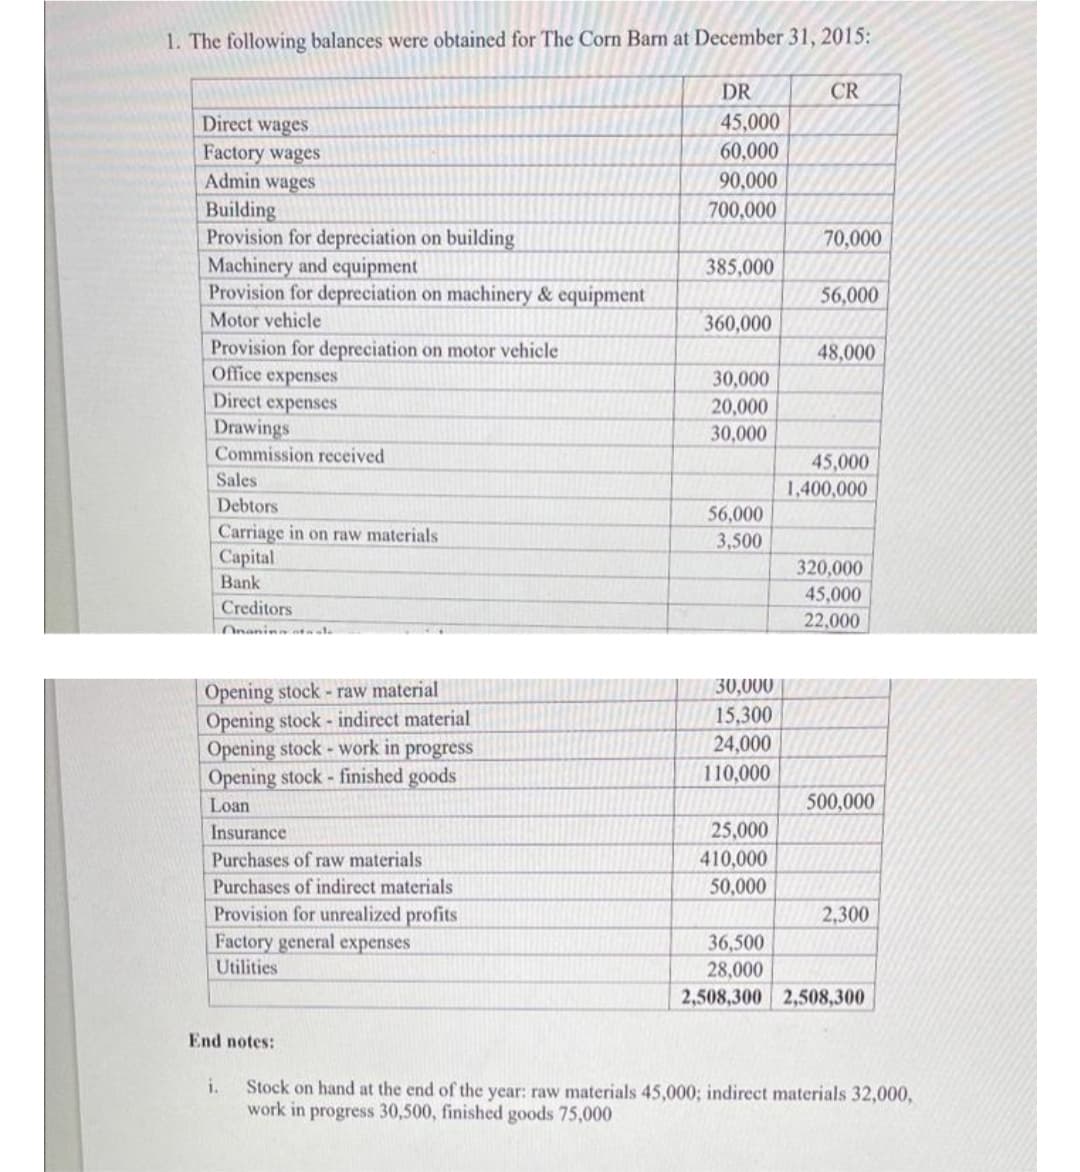 1. The following balances were obtained for The Corn Barn at December 31, 2015:
DR
45,000
60,000
90,000
700,000
Direct wages
Factory wages
Admin wages
Building
Provision for depreciation on building
Machinery and equipment
Provision for depreciation on machinery & equipment
Motor vehicle
Provision for depreciation on motor vehicle
Office expenses
Direct expenses
Drawings
Commission received
Sales
Debtors
Carriage in on raw materials
Capital
Bank
Creditors
Onaning tale
Opening stock - raw material
Opening stock - indirect material
Opening stock work in progress
Opening stock - finished goods
Loan
Insurance
Purchases of raw materials
Purchases of indirect materials
Provision for unrealized profits
Factory general expenses
Utilities
End notes:
i.
385,000
360,000
30,000
20,000
30,000
56,000
3,500
30,000
15,300
24,000
110,000
25,000
410,000
50,000
CR
70,000
56,000
48,000
45,000
1,400,000
320,000
45,000
22,000
500,000
2,300
36,500
28,000
2,508,300 2,508,300
Stock on hand at the end of the year: raw materials 45,000; indirect materials 32,000,
work in progress 30,500, finished goods 75,000